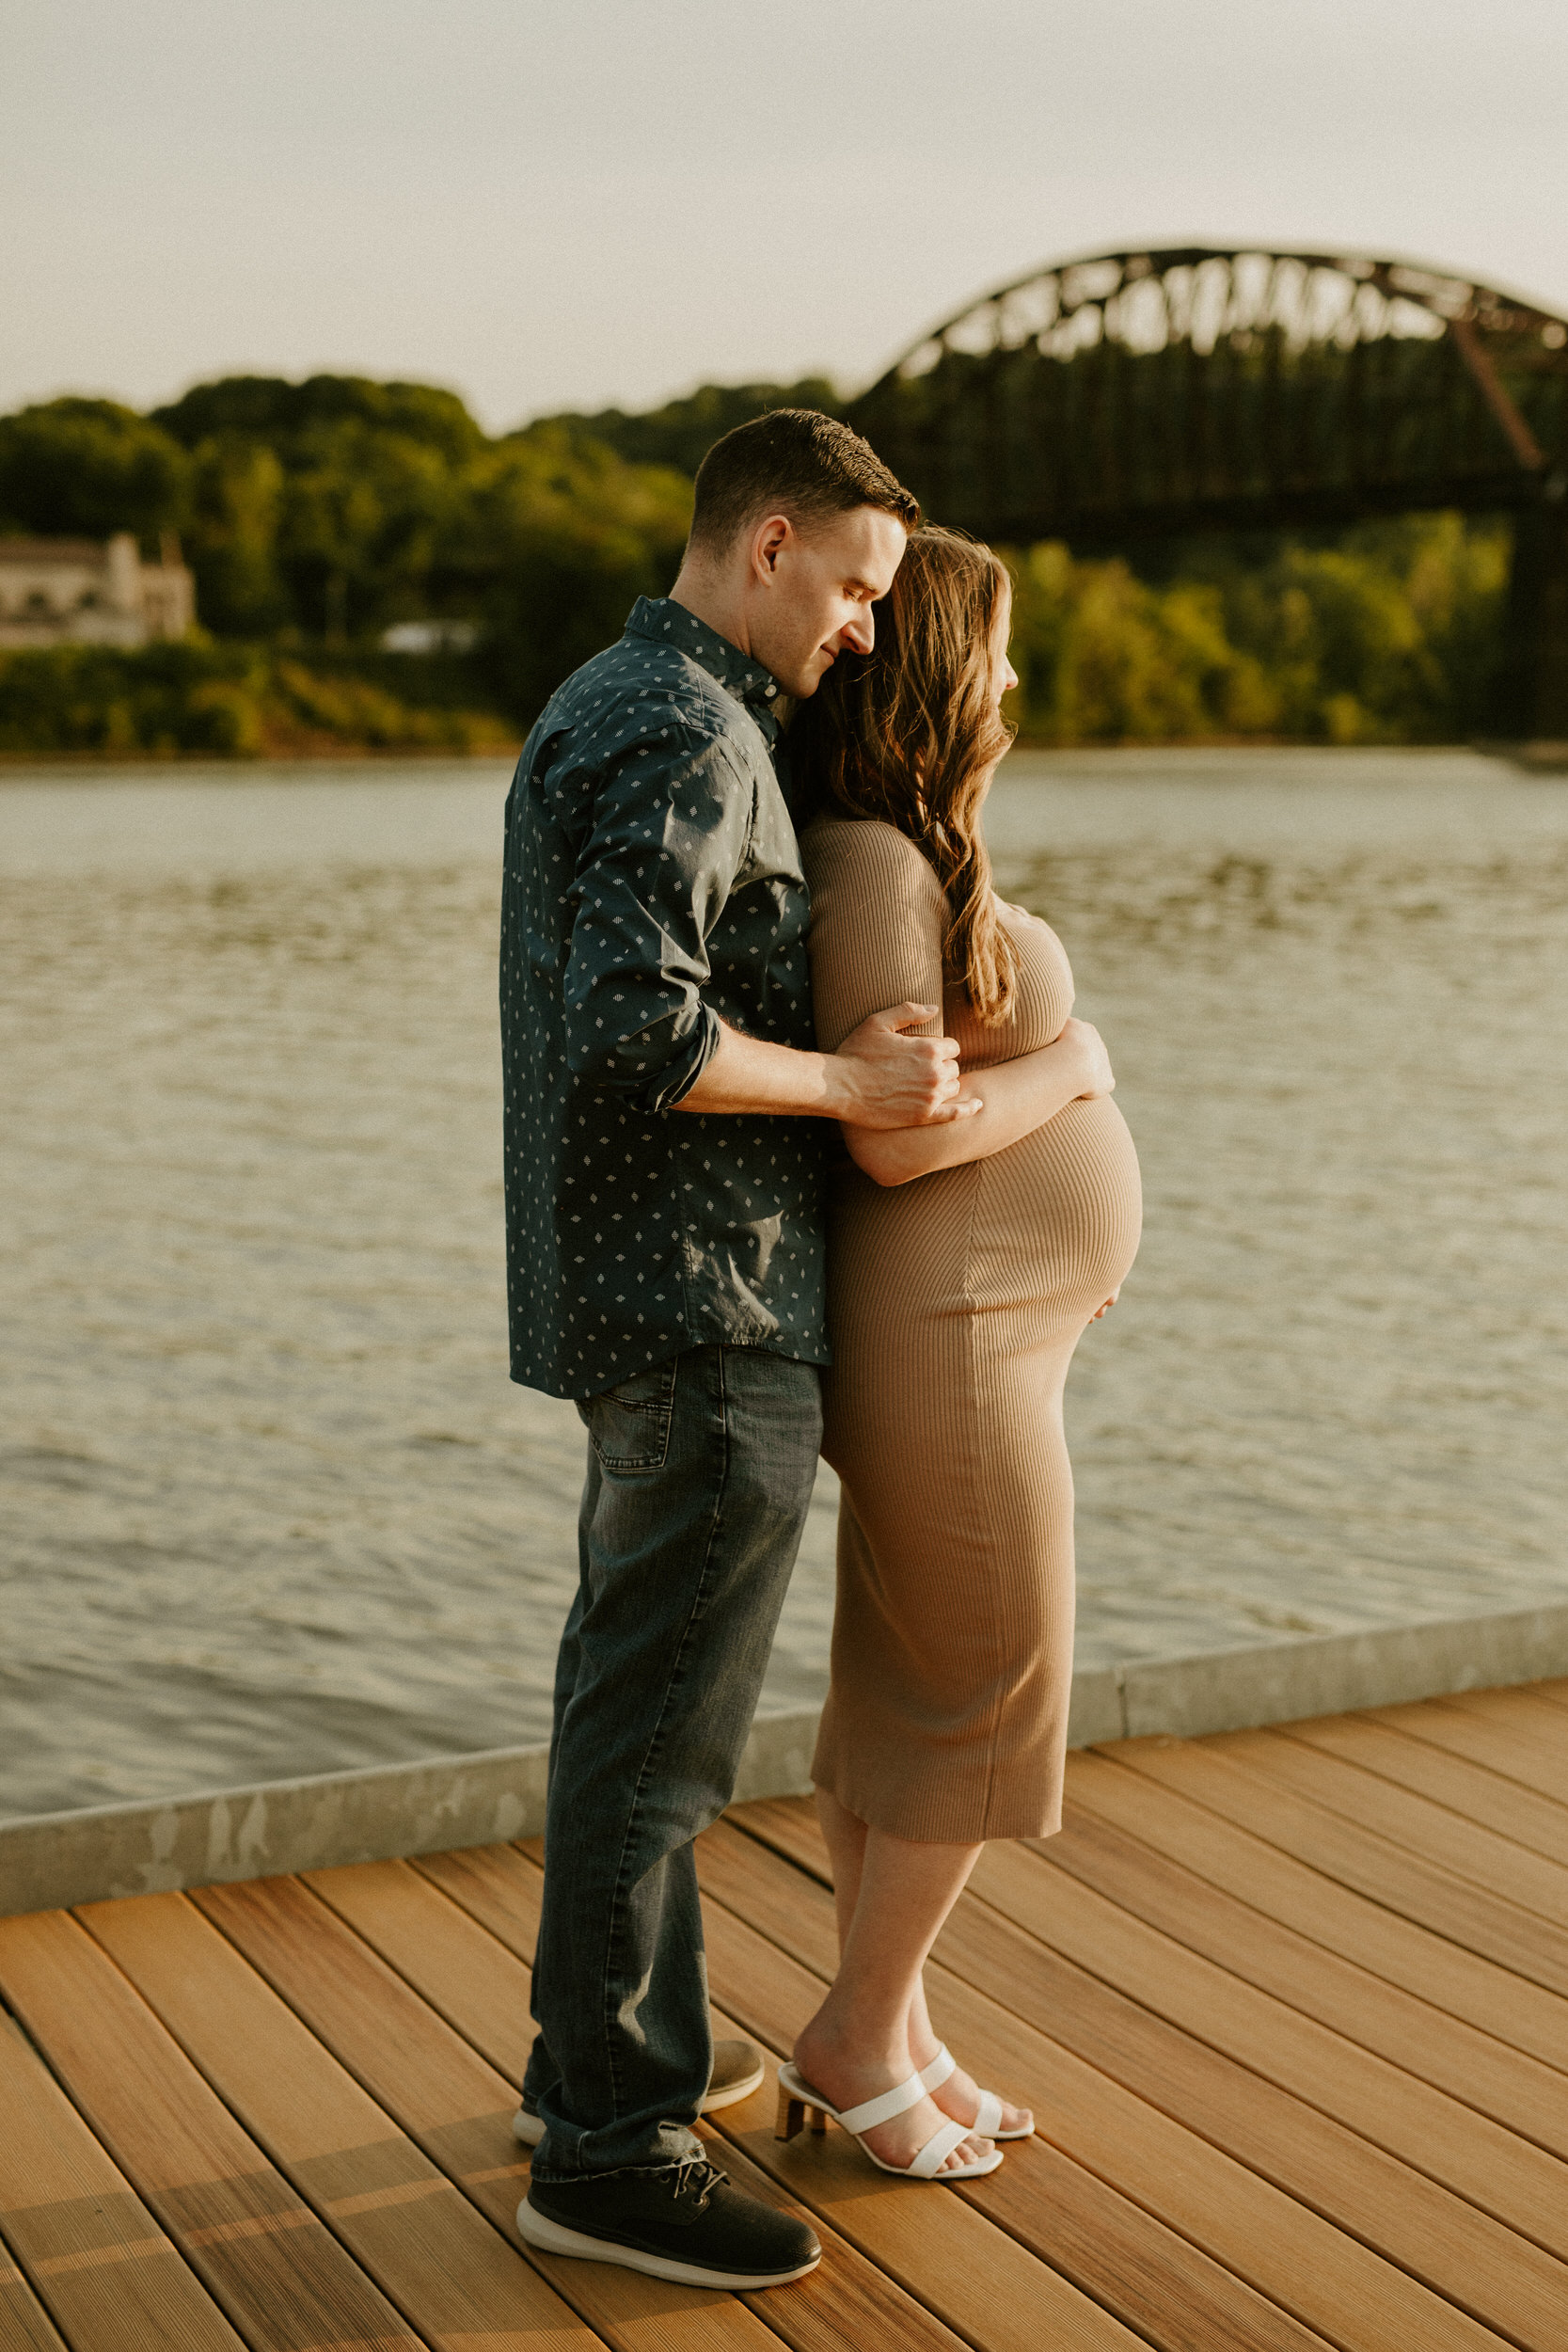 Pregnancy photography pittsburgh